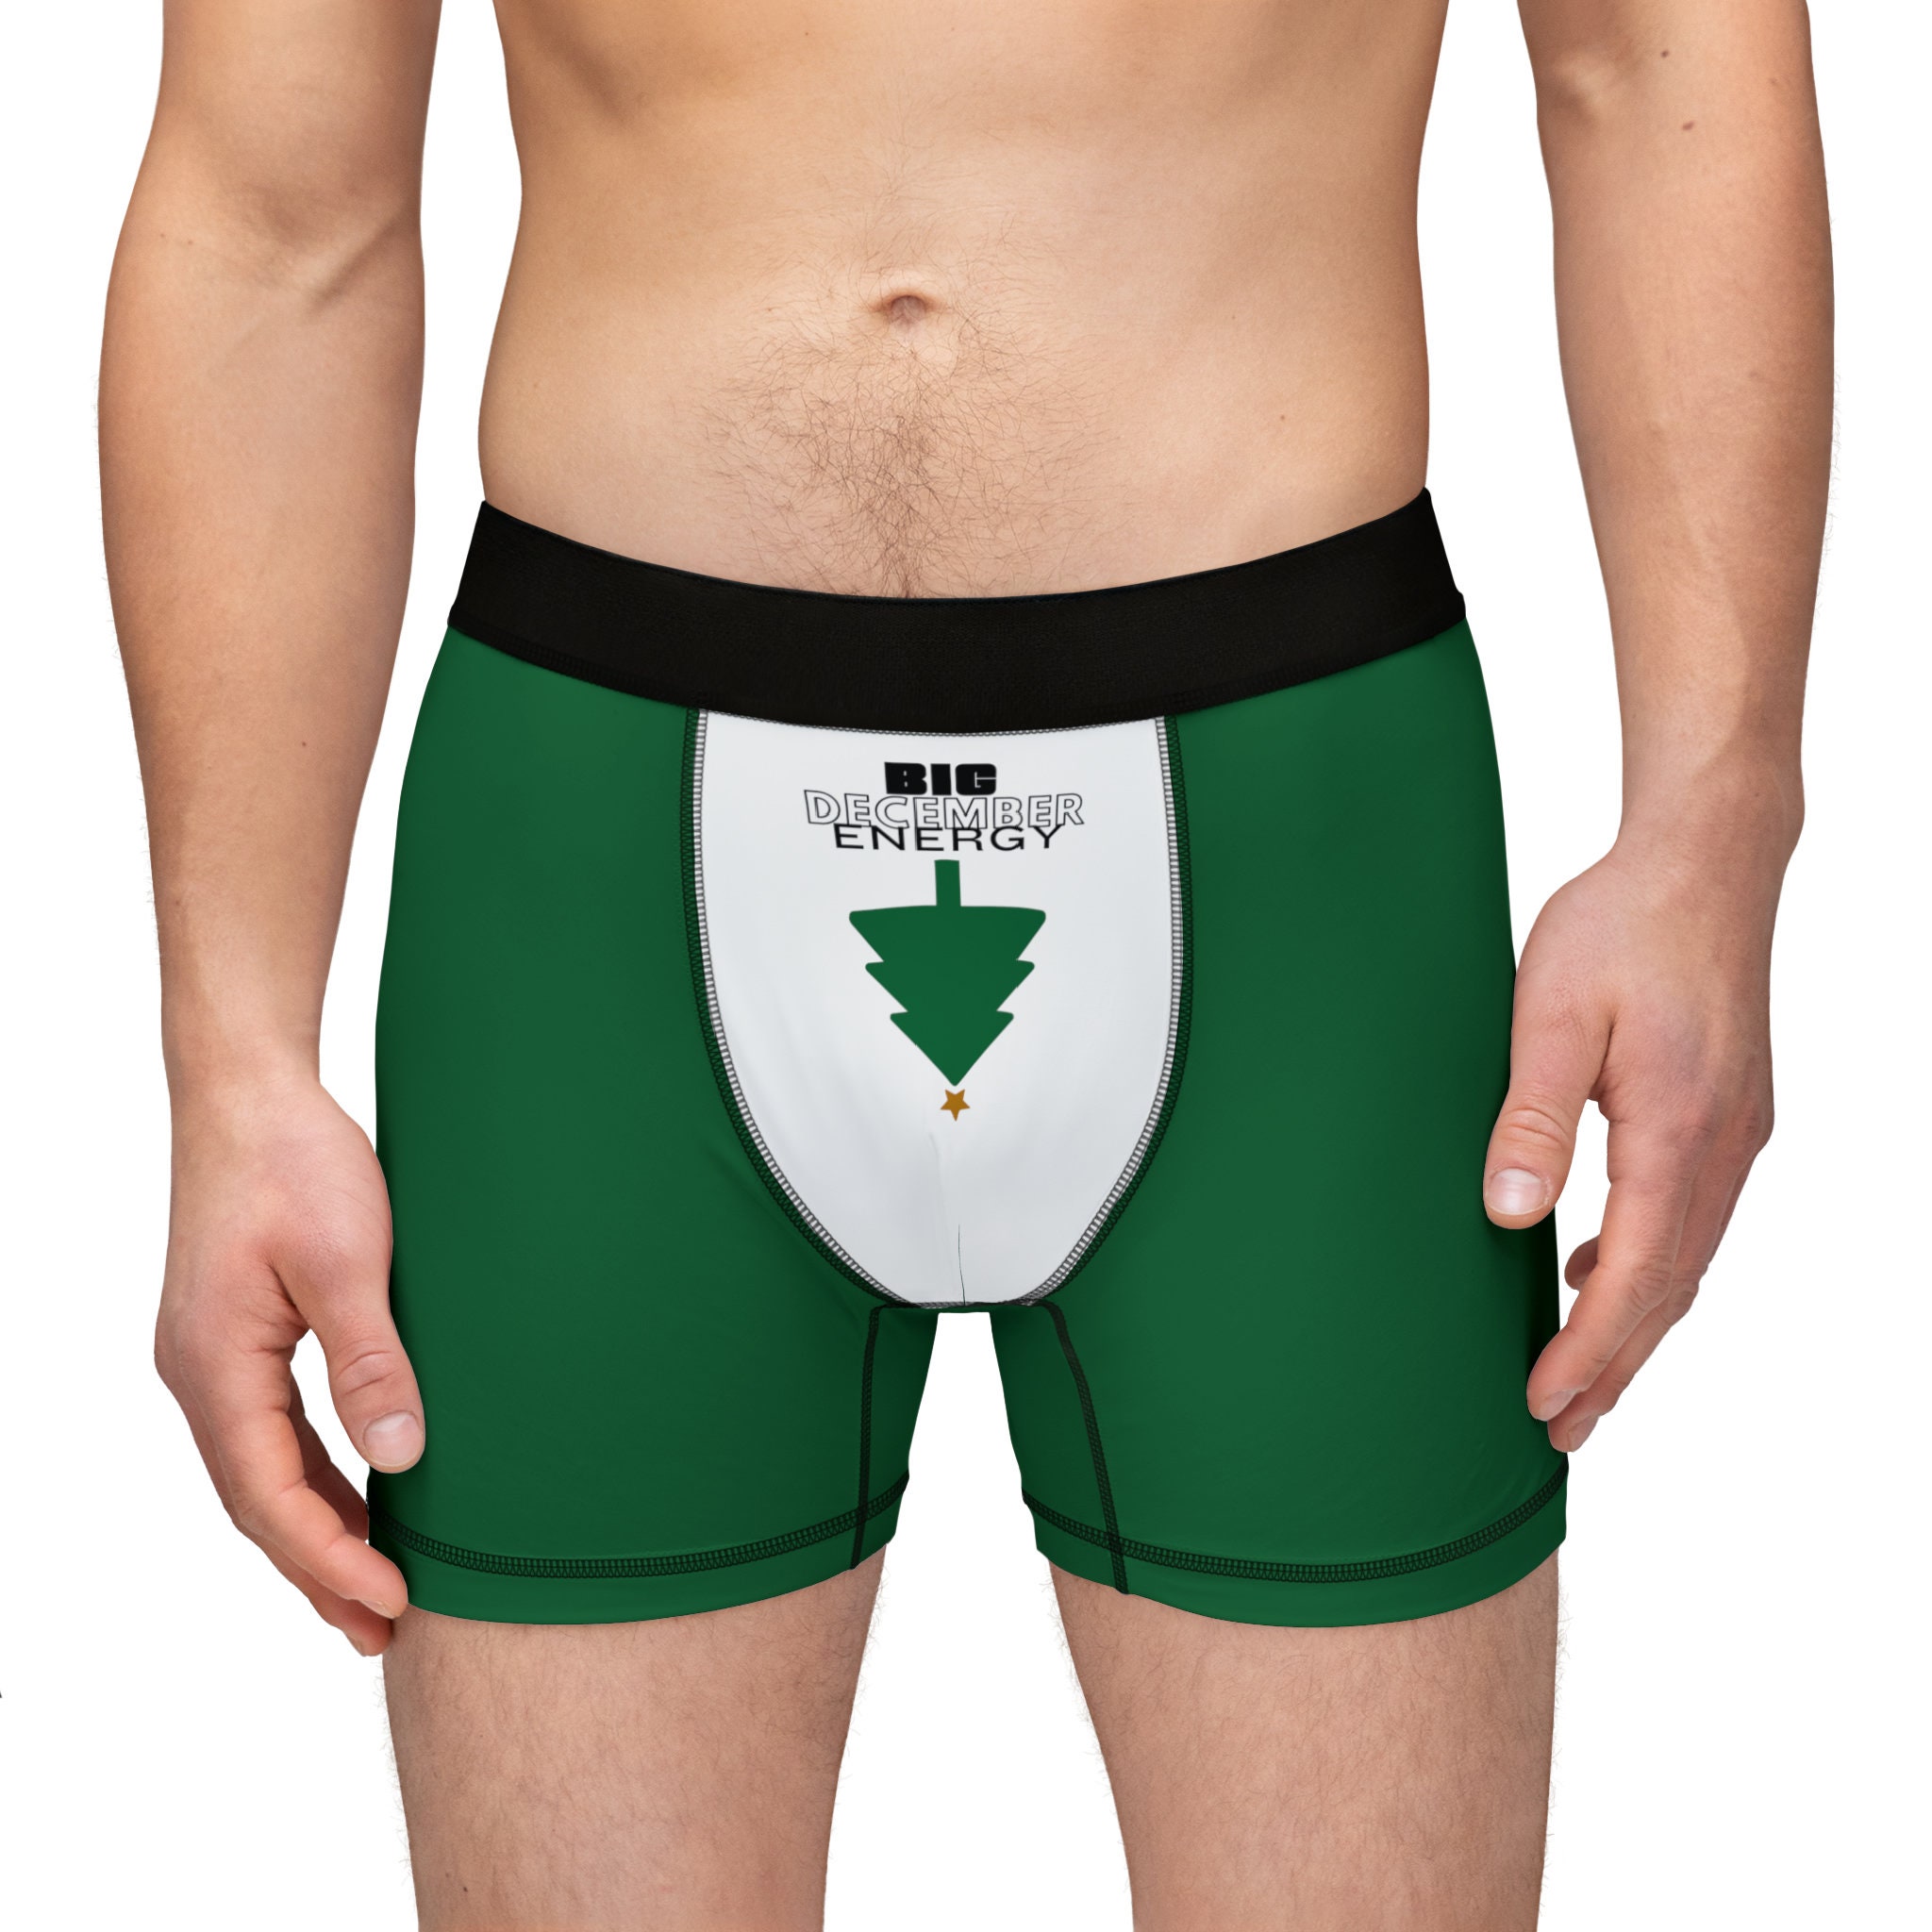 Big Gift Energy Boxer Briefs: Men's Christmas Outfits